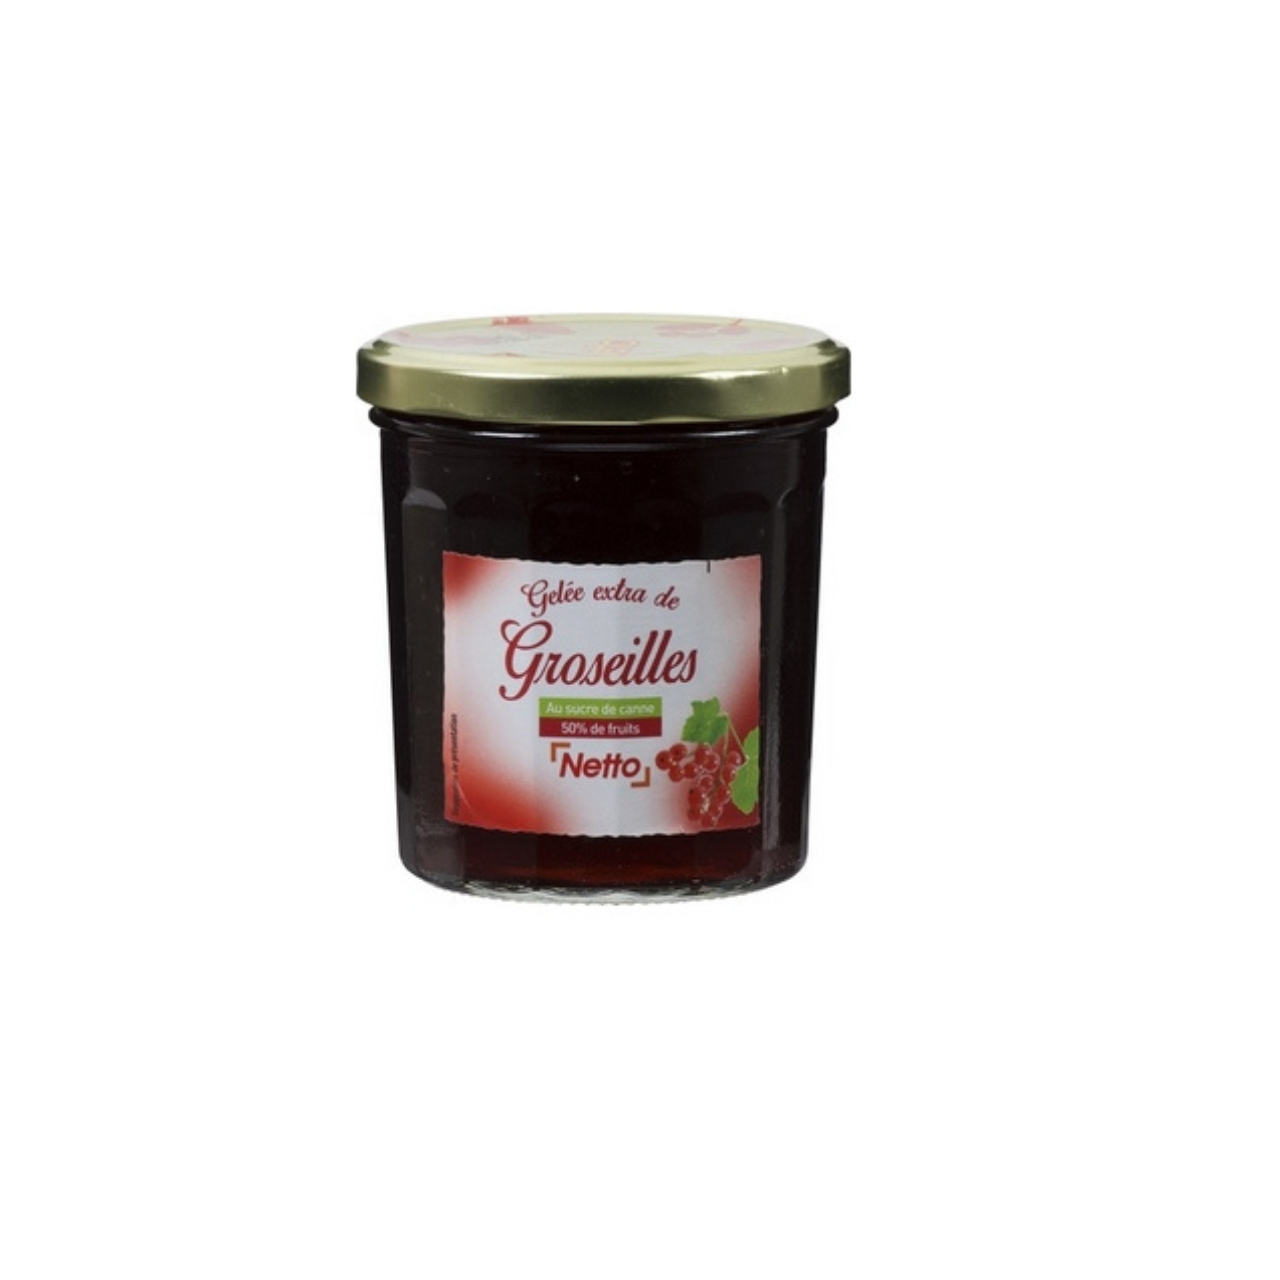 NETTO Gooseberry jelly 370g BBD -D131